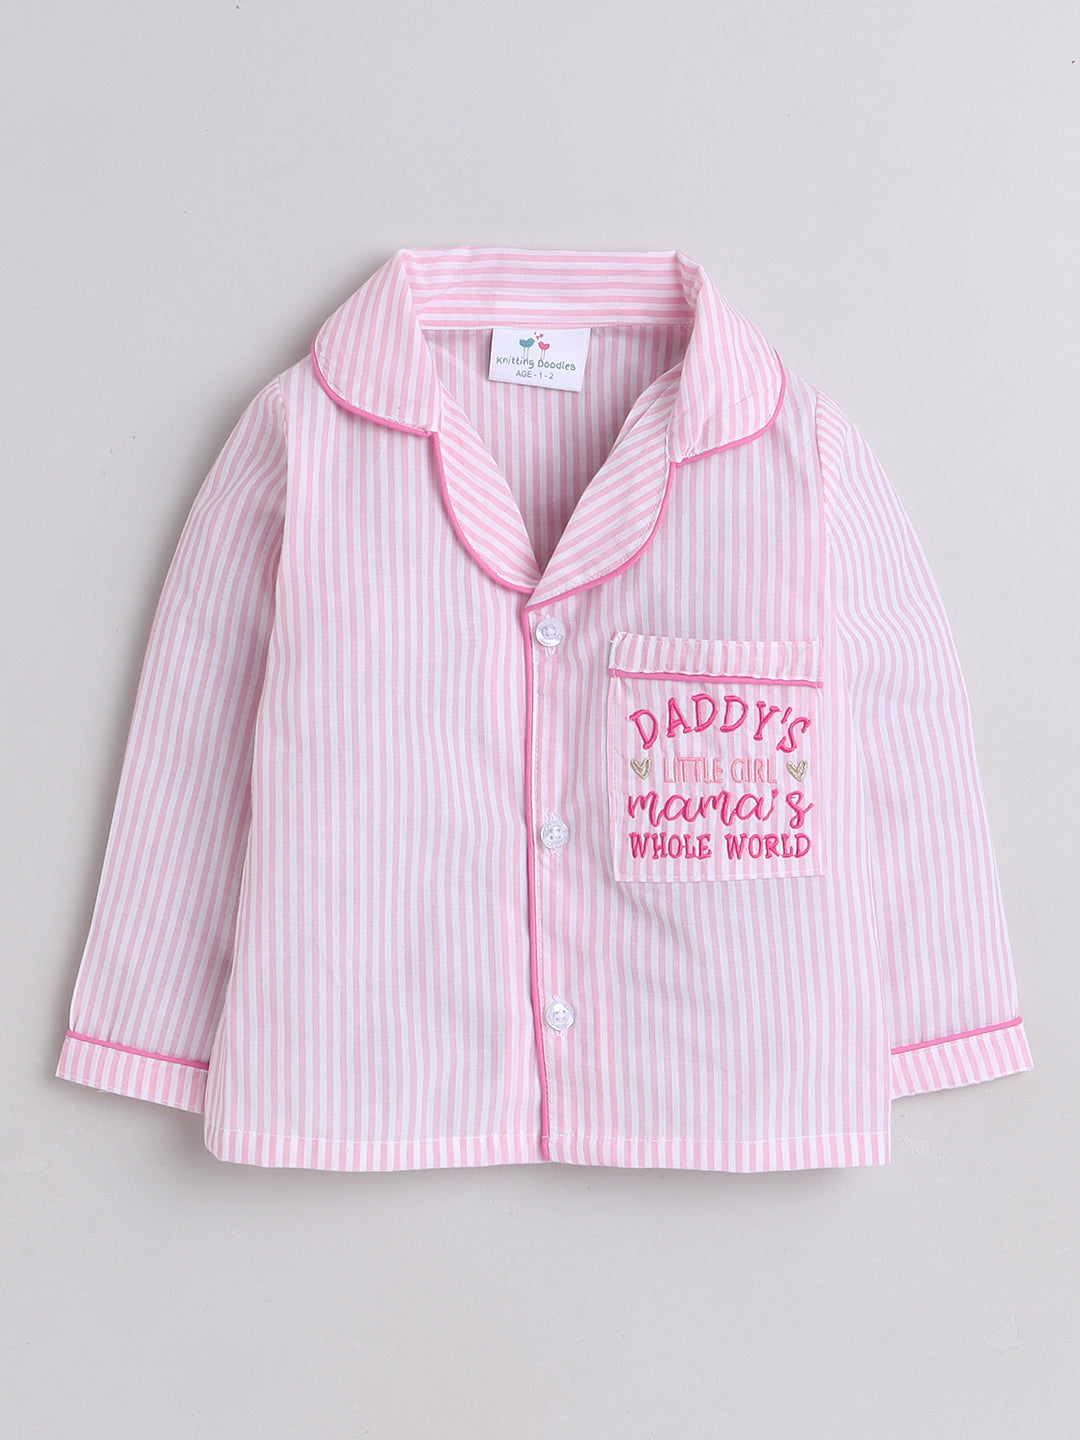 Pink and White Stripes Night Suit with cute Daddy's girl embroidery on the pocket